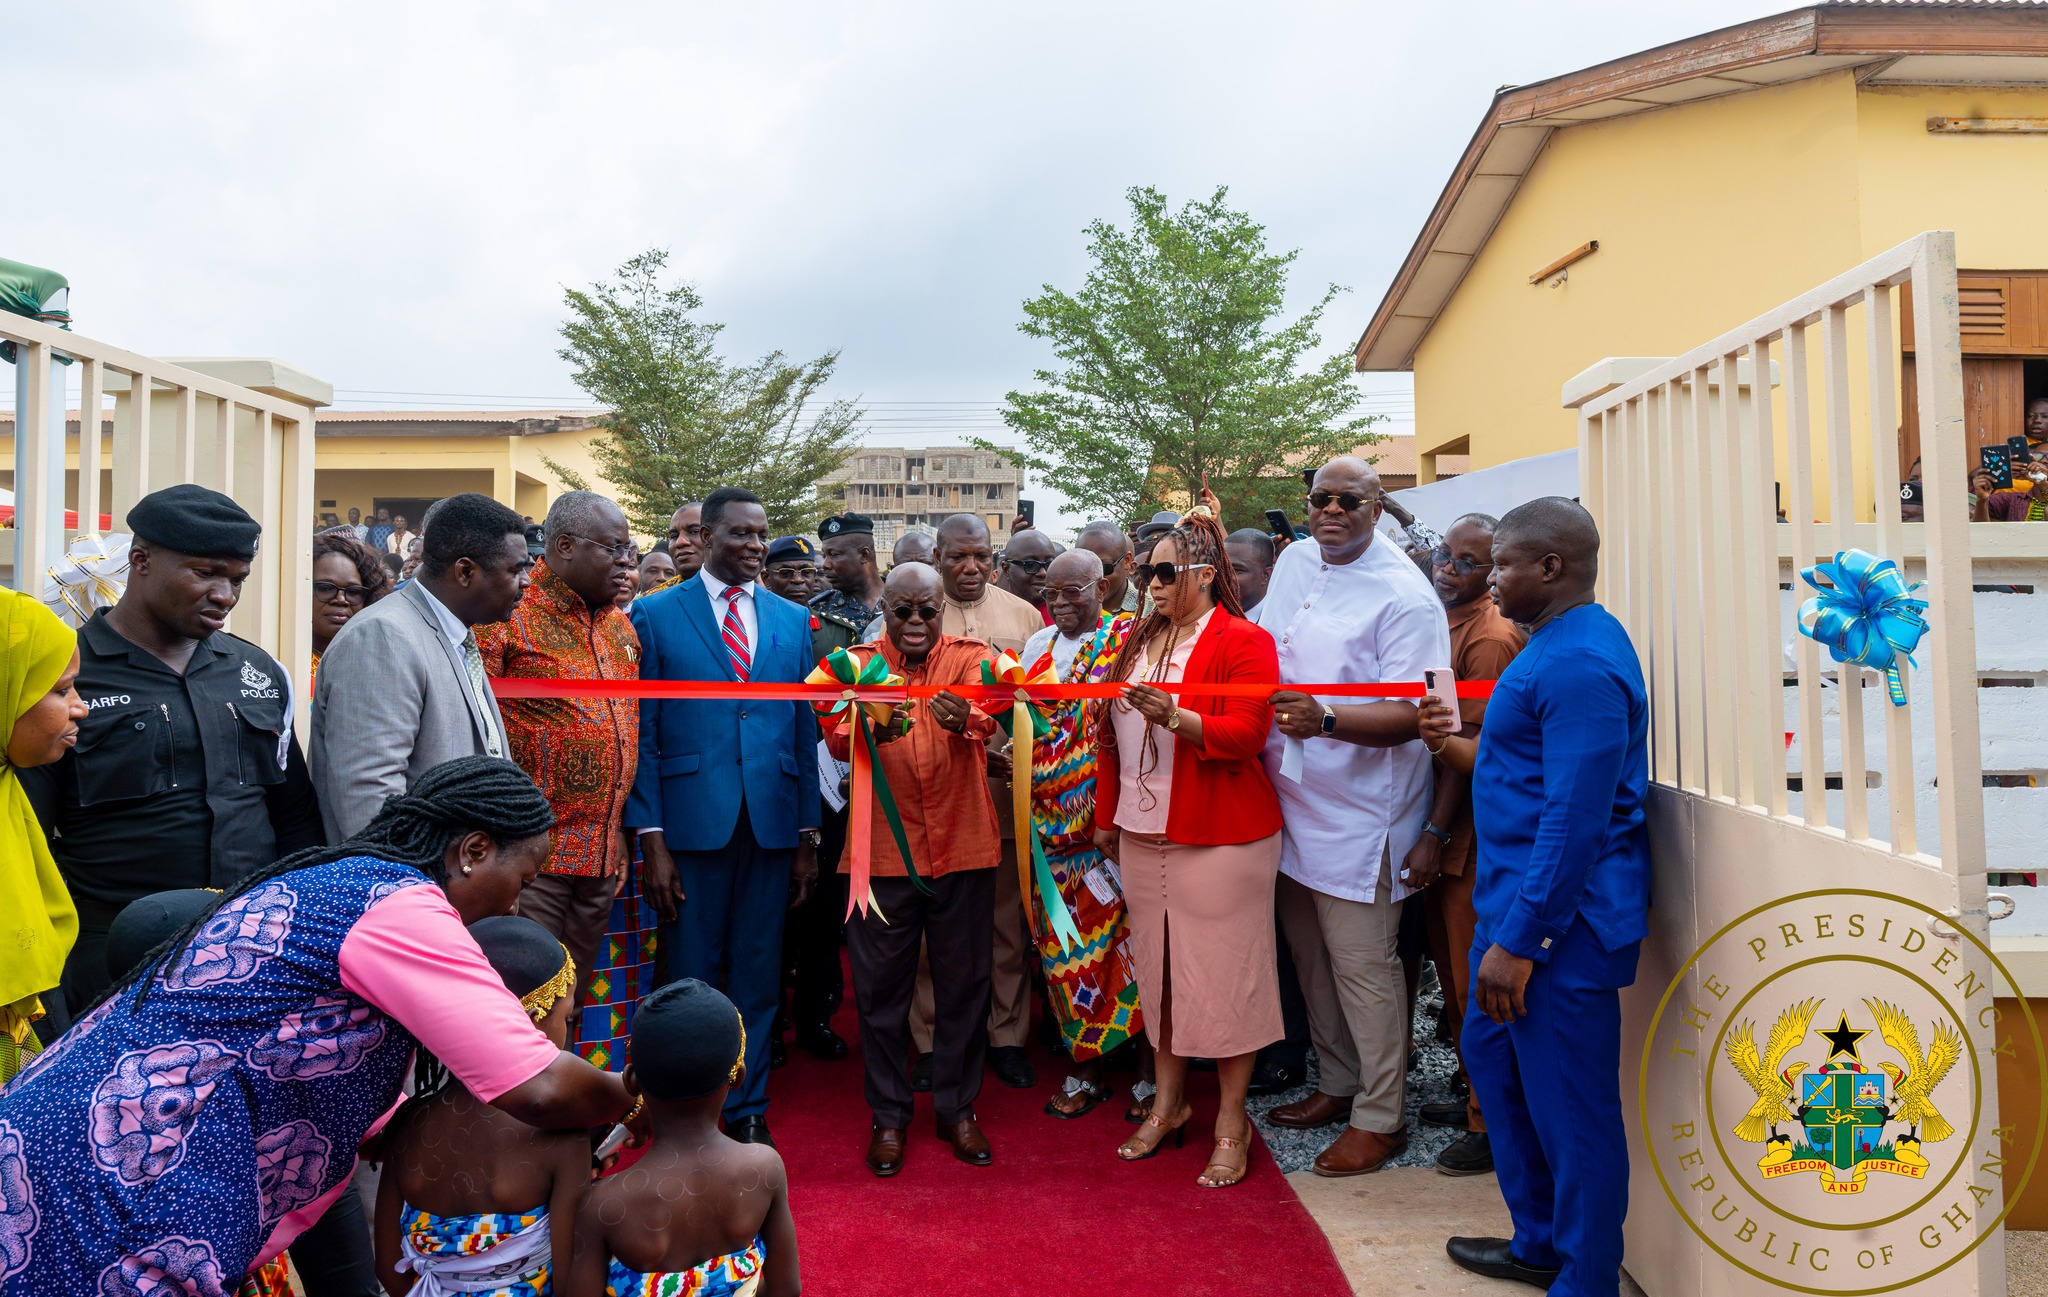 Nana Akufo-Addo was flanked by Adwoa Safo during the inauguration of the school.